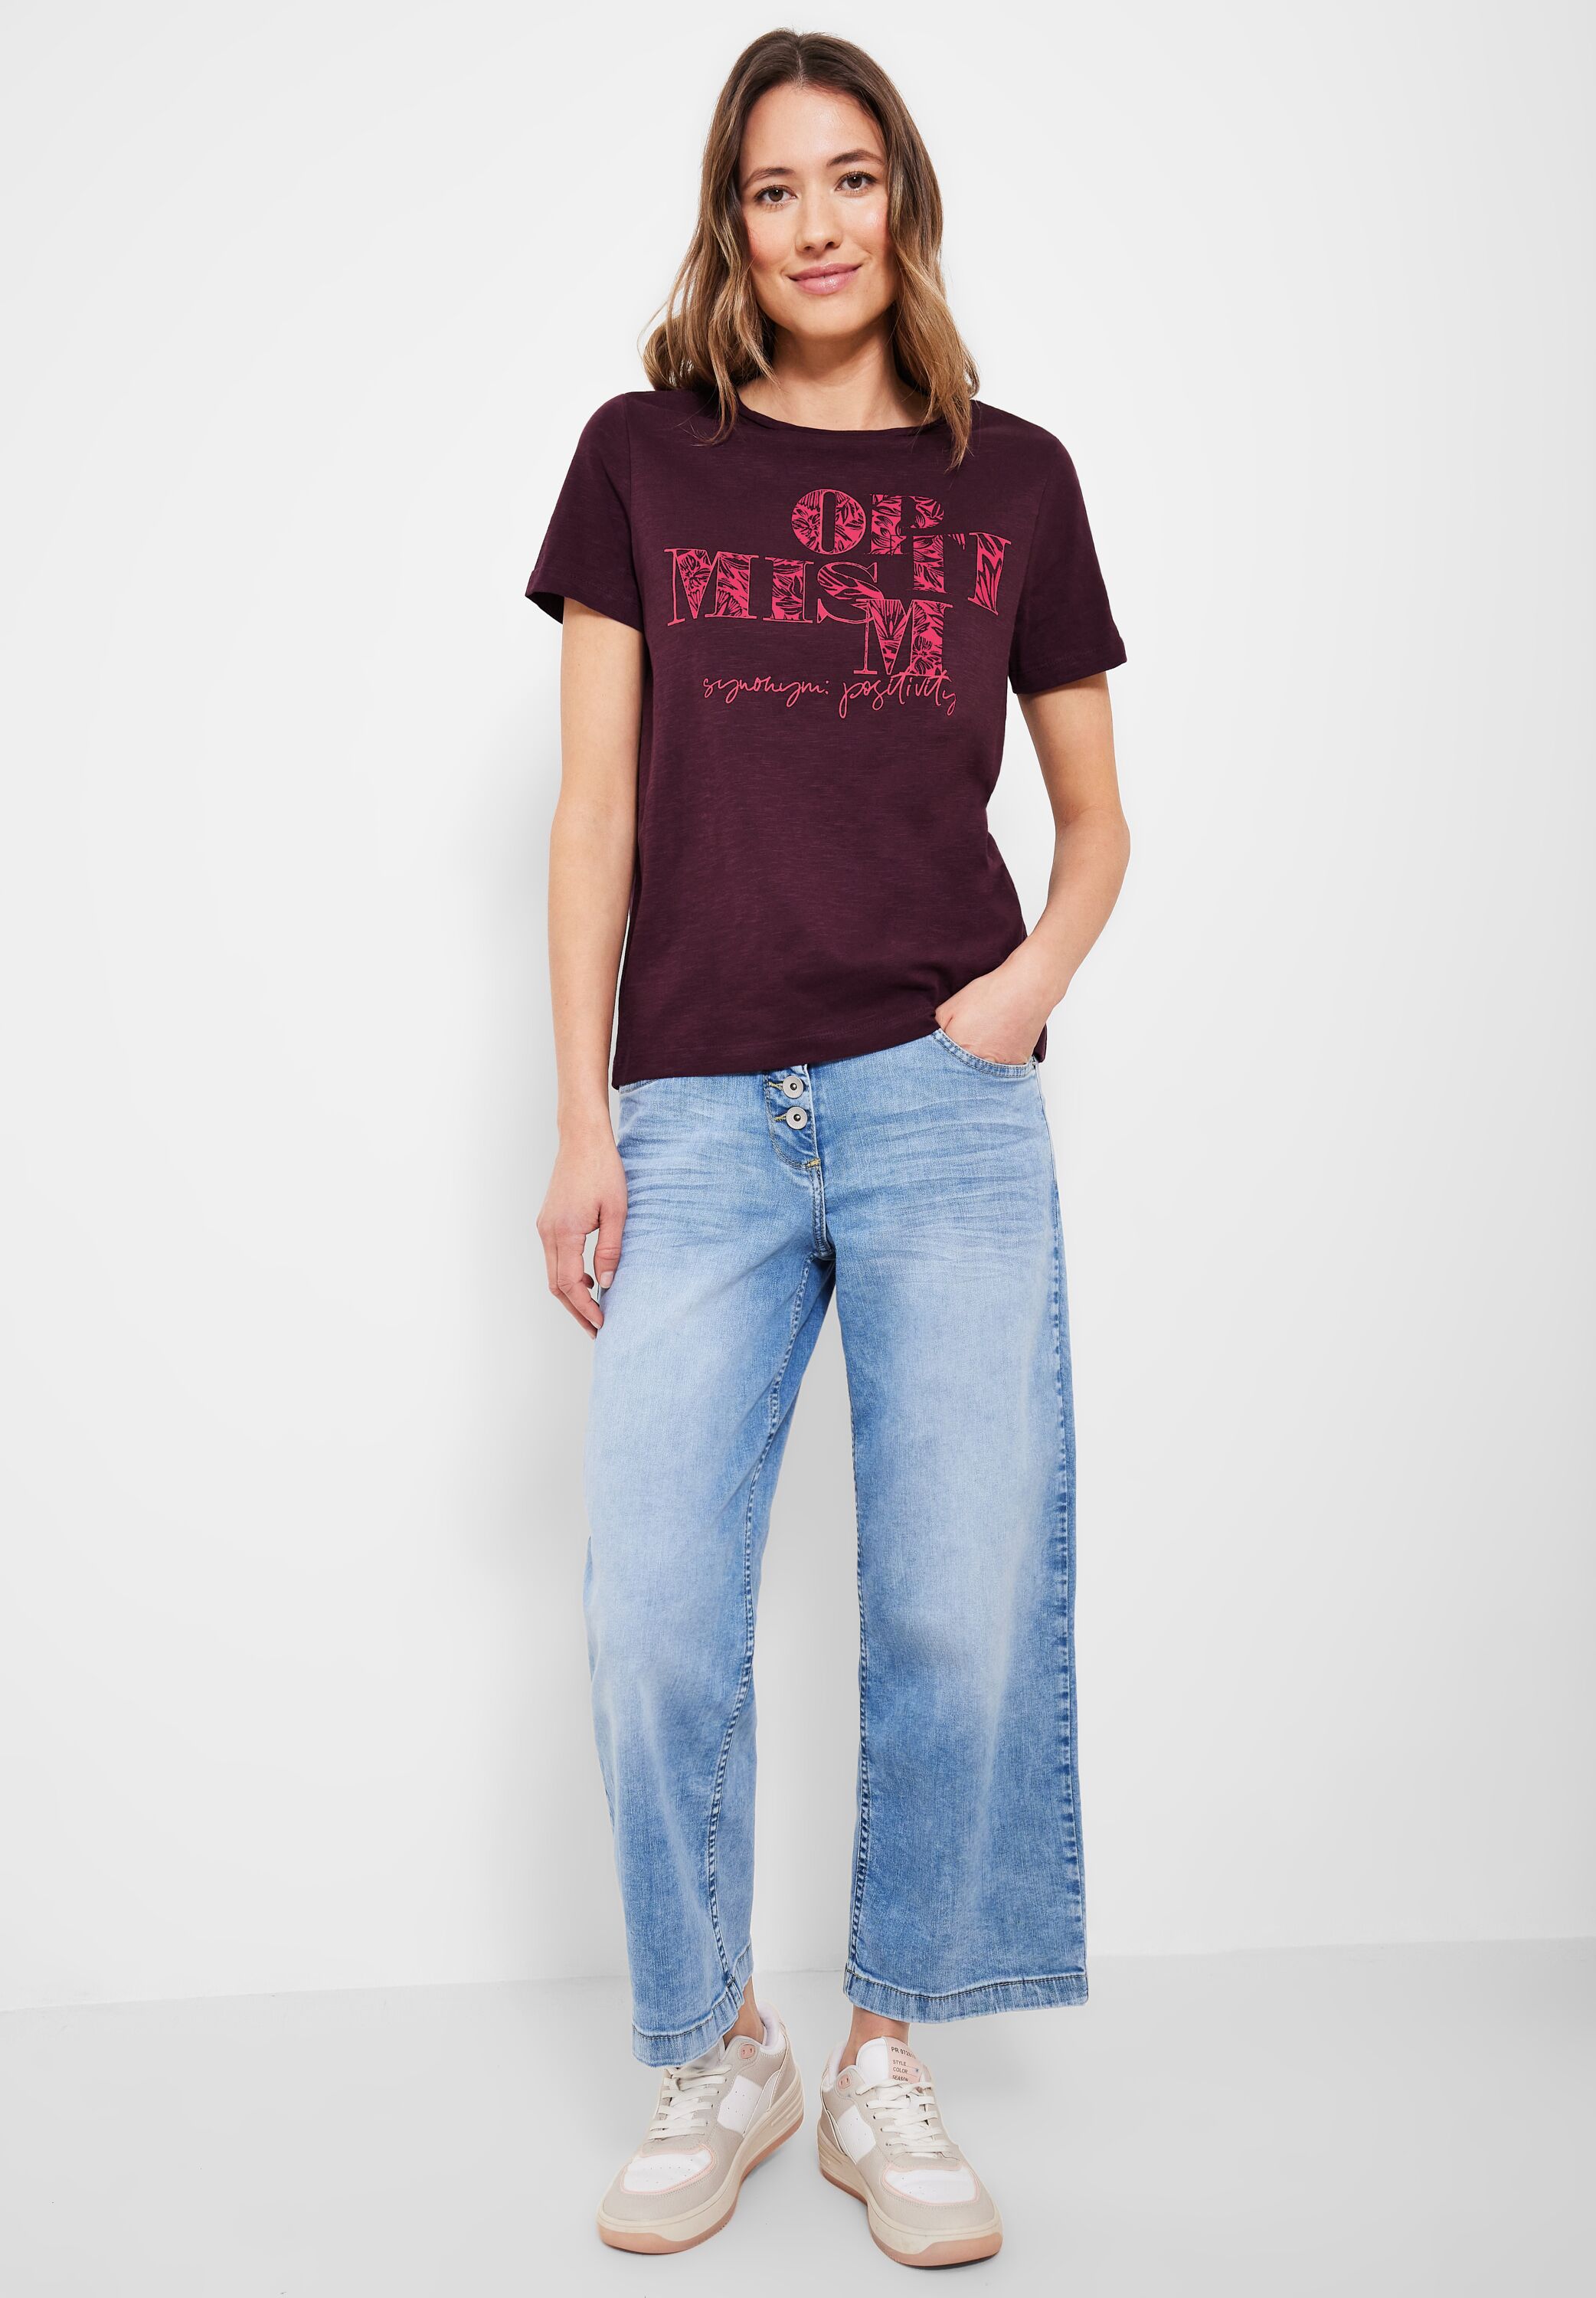 CECIL T-Shirt in Wineberry Red im SALE reduziert B319637-34918 - CONCEPT  Mode